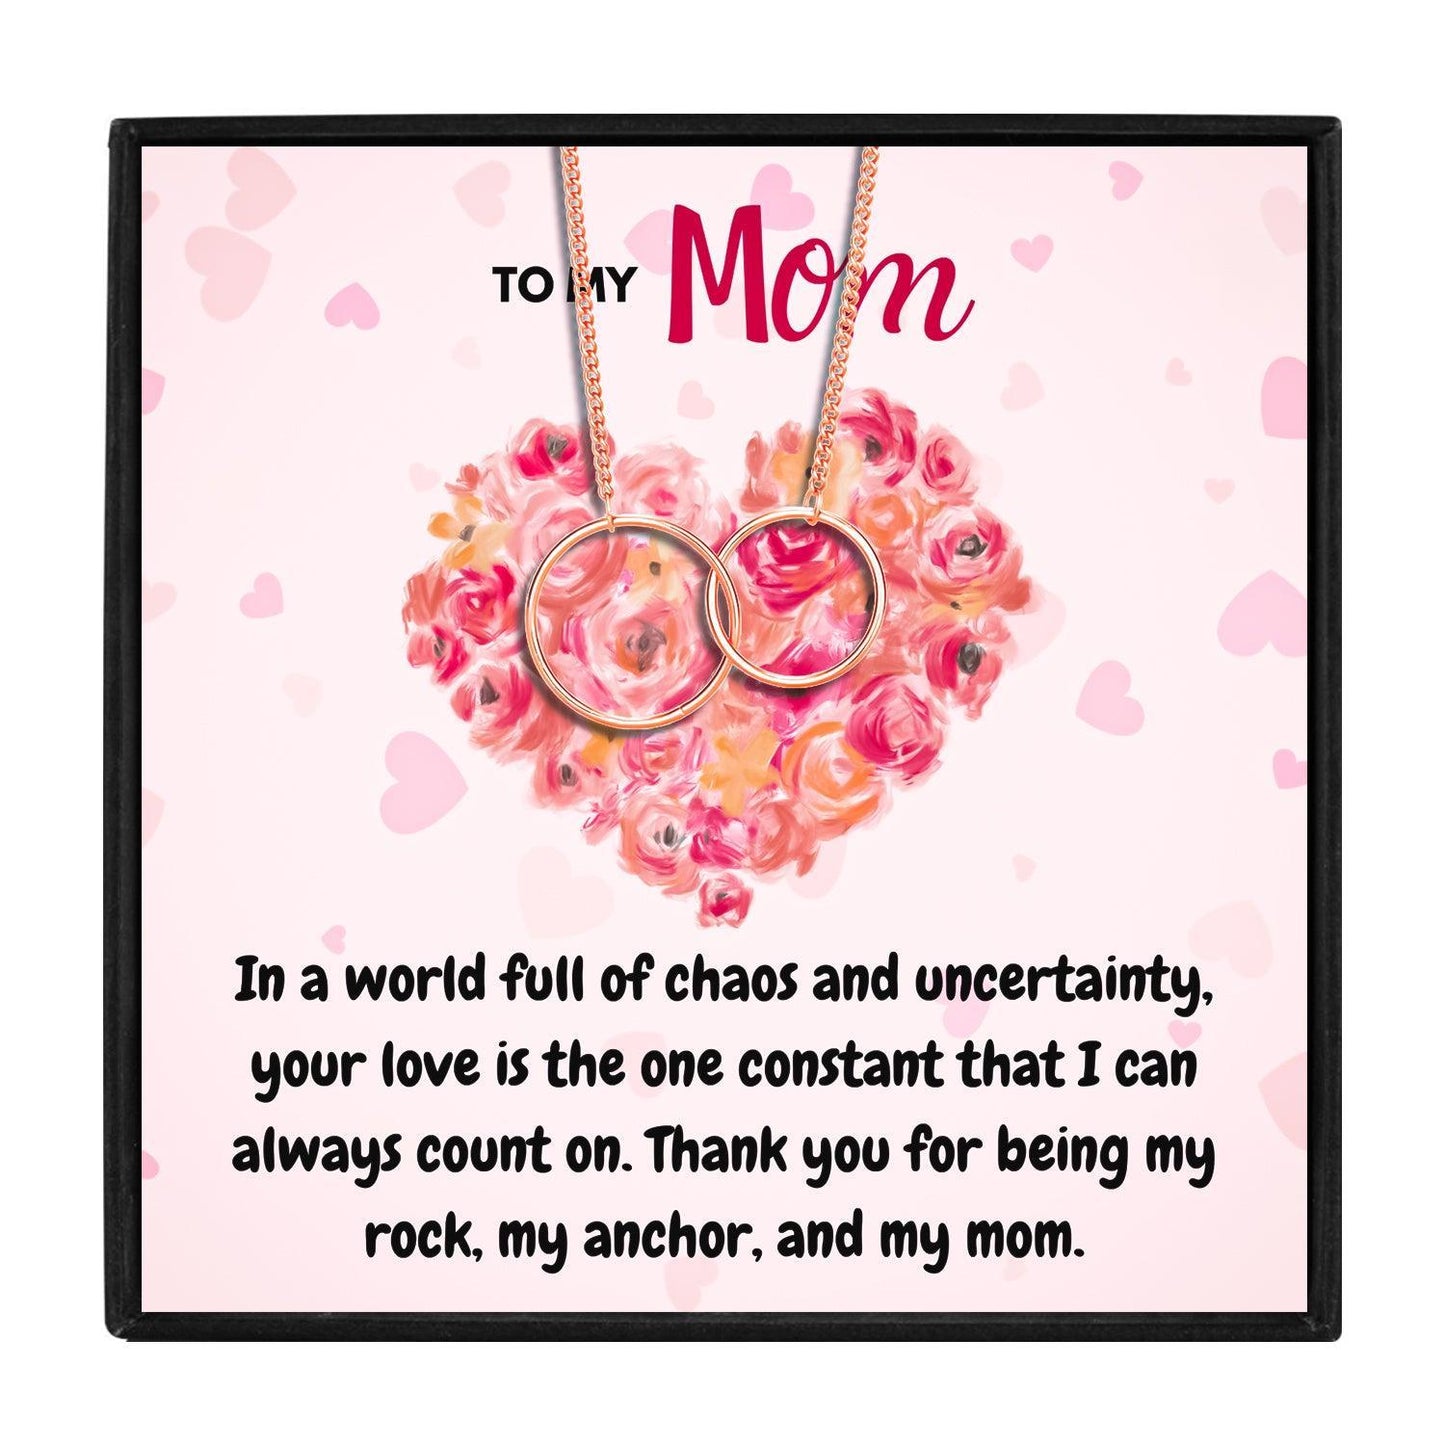 Mom Necklace With Heartfelt Gift Set in 2023 | Mom Necklace With Heartfelt Gift Set - undefined | gift for mom, Gift Necklace, Heartfelt Mother Necklace, mom birthday gift, mom gift, mom gift ideas, Mom Necklace, Mom Necklace Gift | From Hunny Life | hunnylife.com